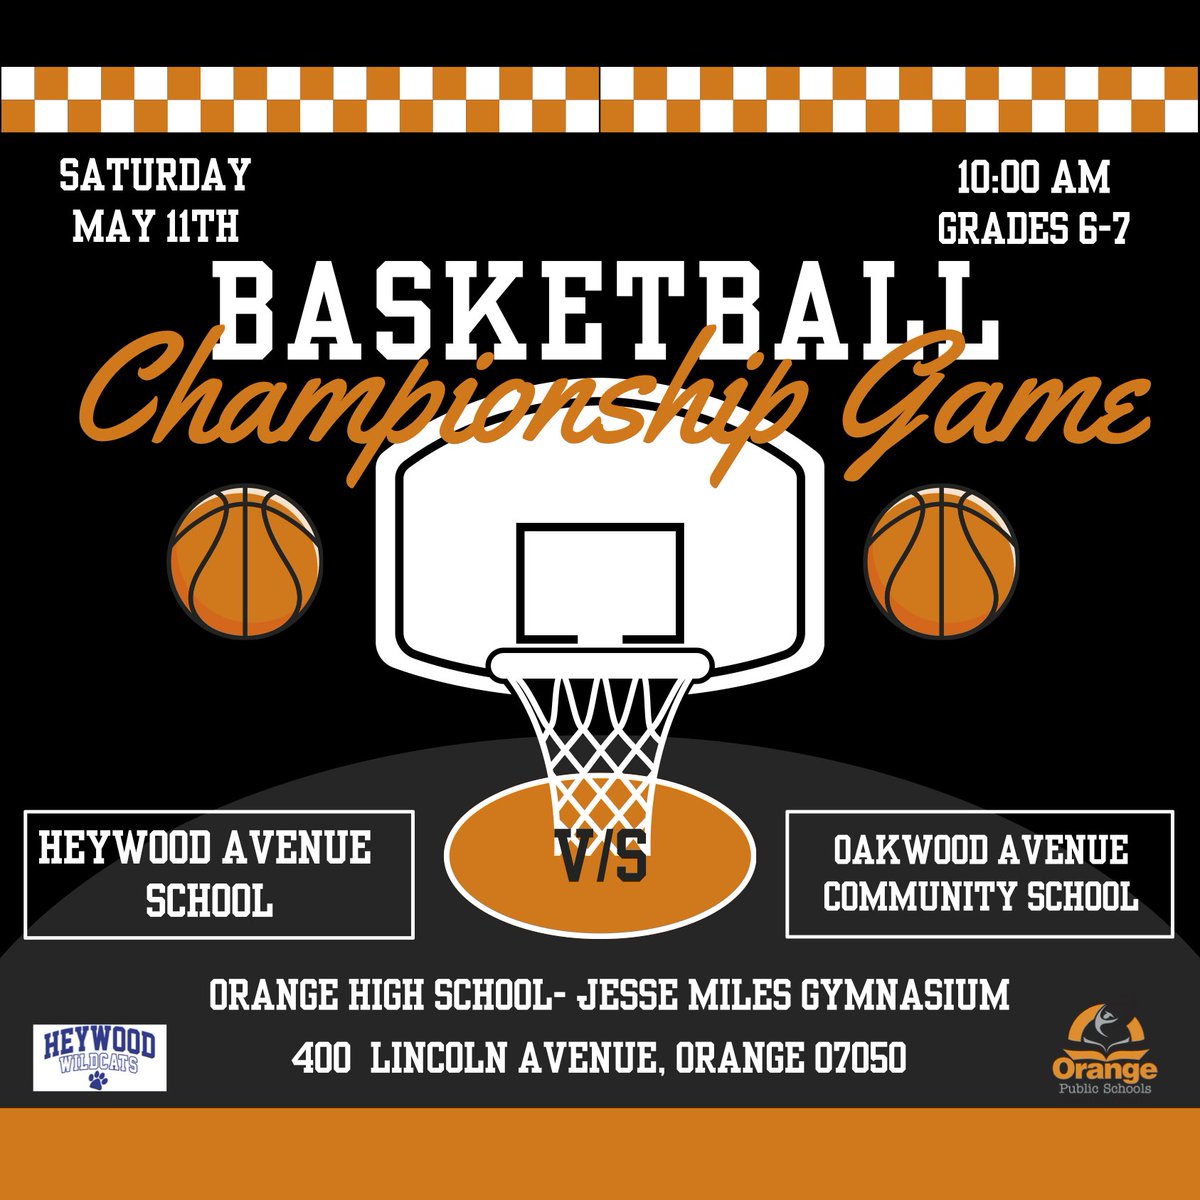 Support our Basketball Championship this upcoming Saturday at the Jesse Miles Gymnasium! #GoodtoGreat #MovingintoGreatness #OrangeStrong💪🏽